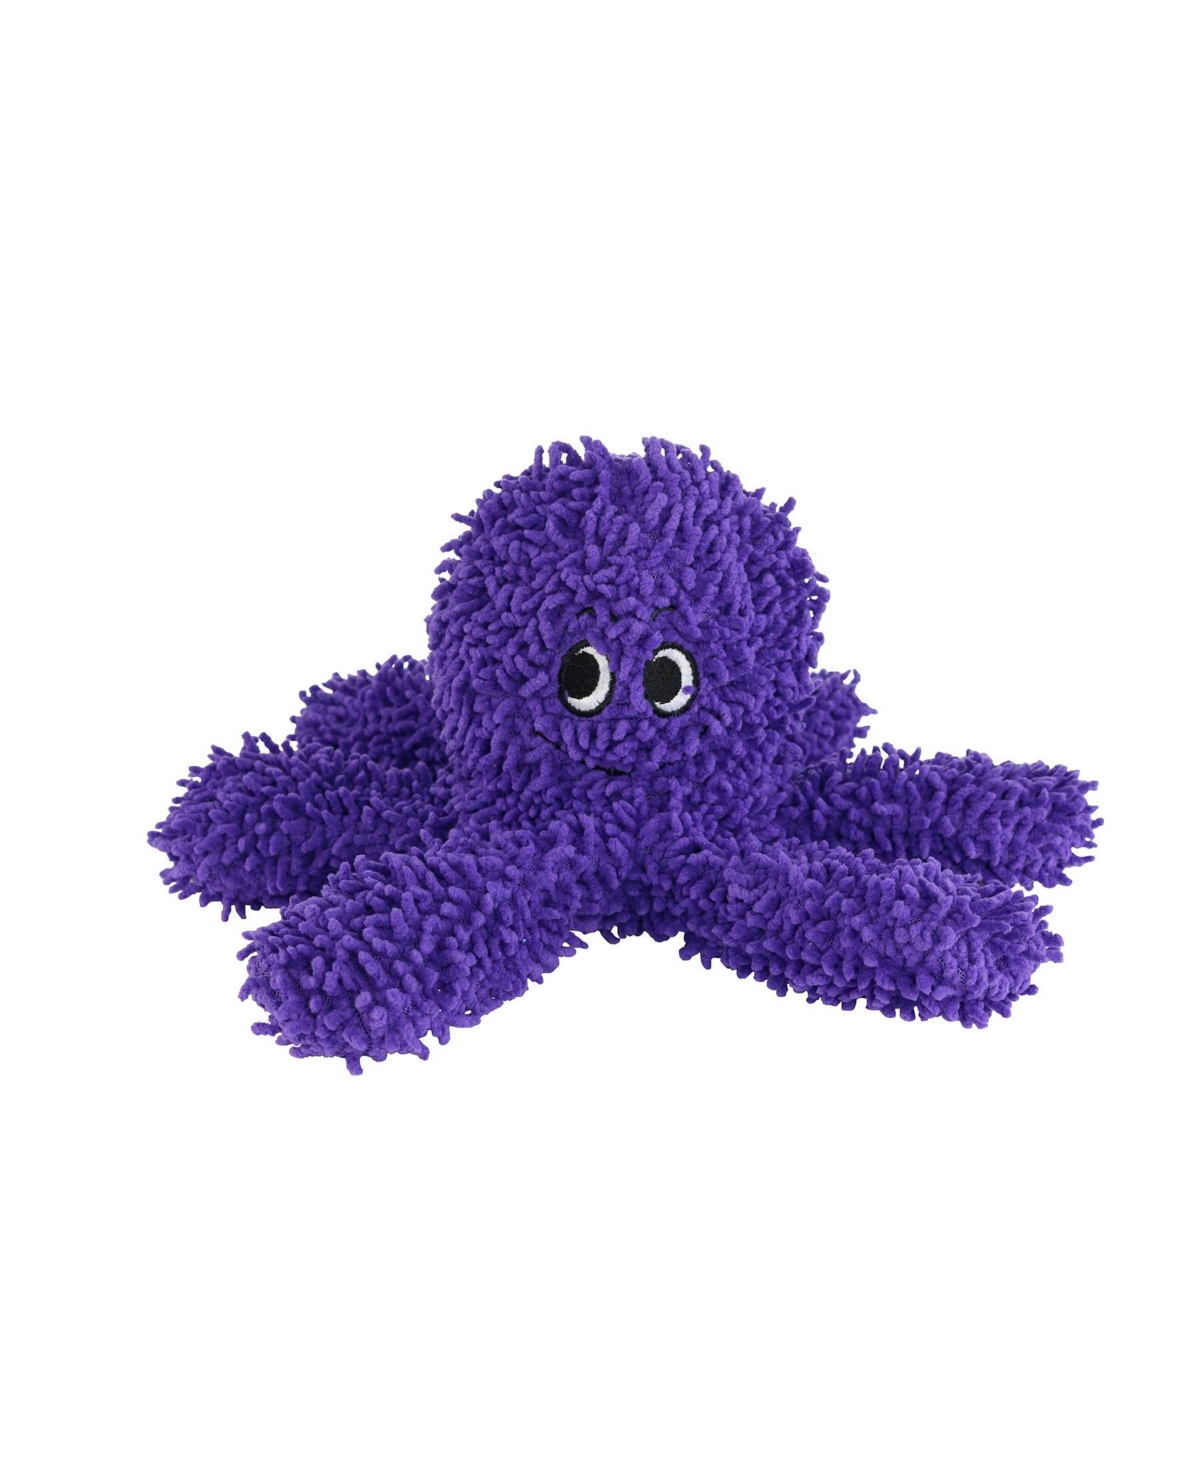 Microfiber Ball Med Octopus Squeaky Dog Toy - Purple